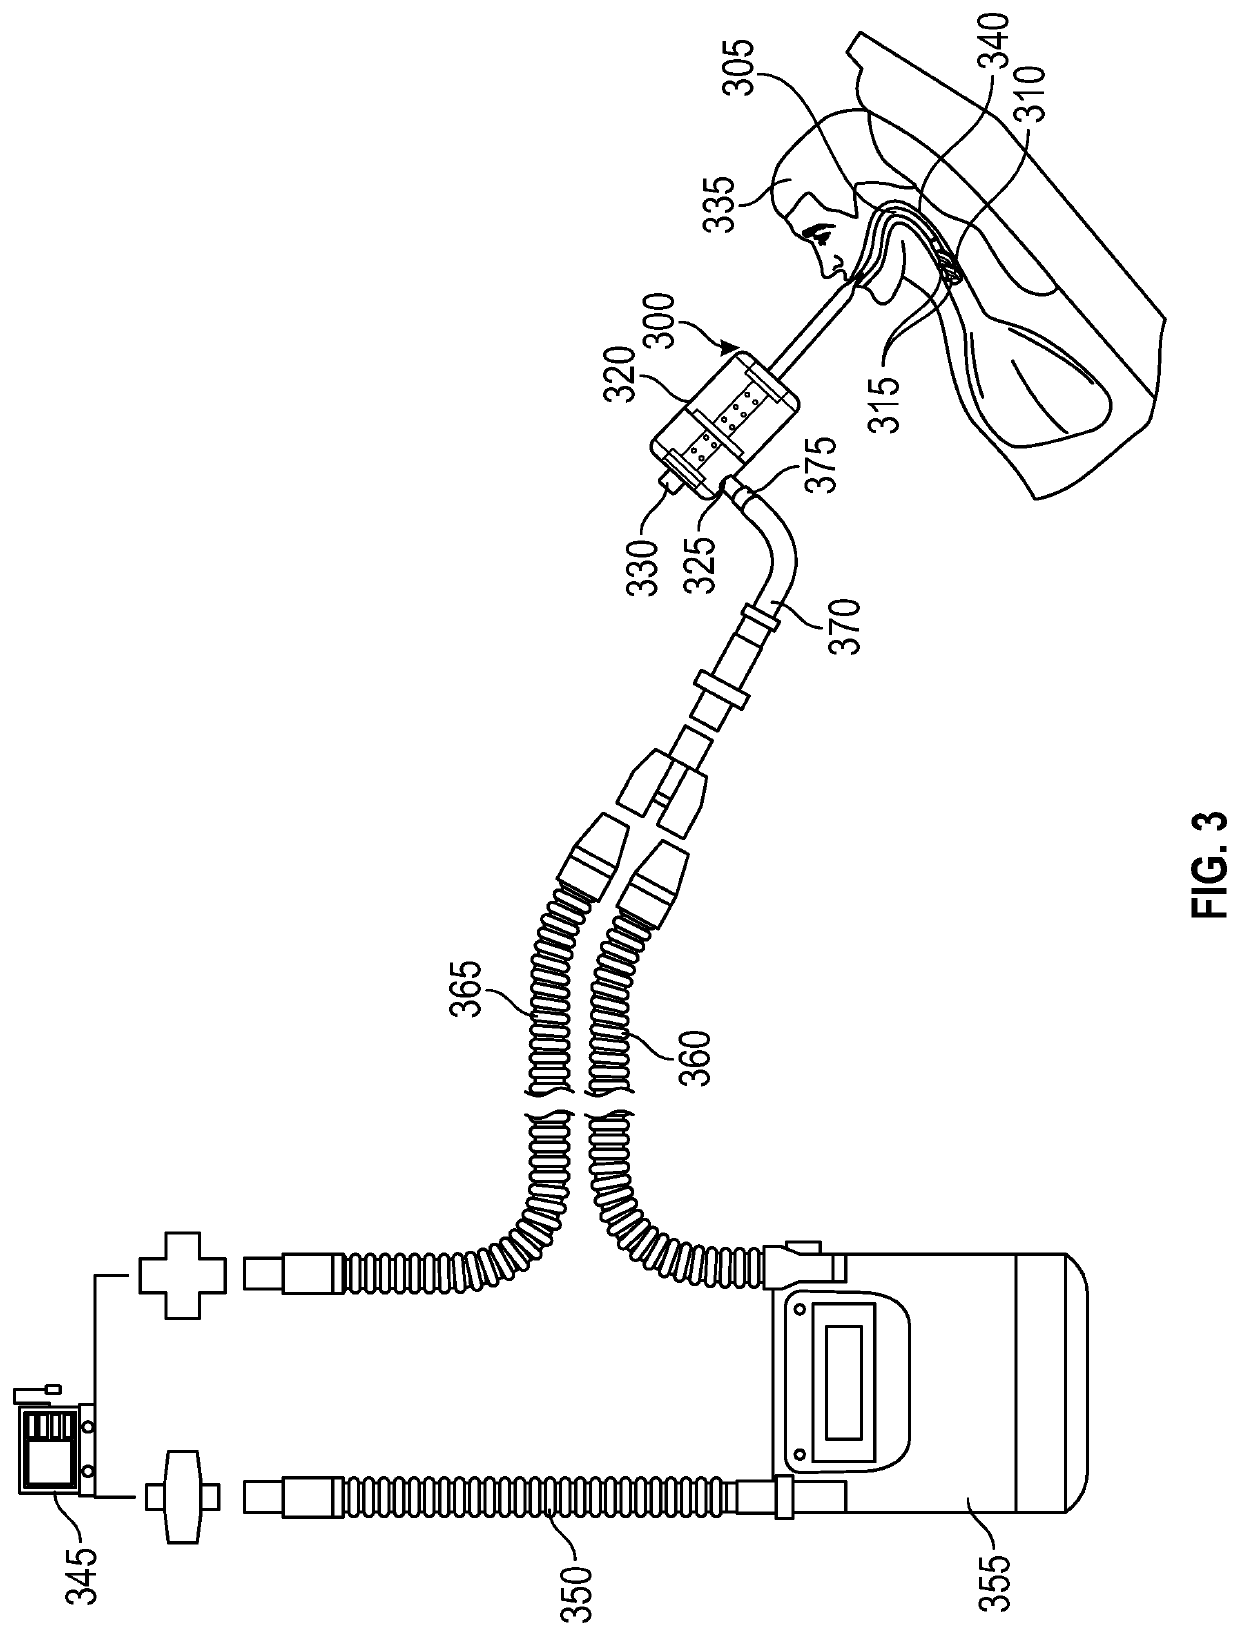 Biofilm removal device for endotracheal tubes